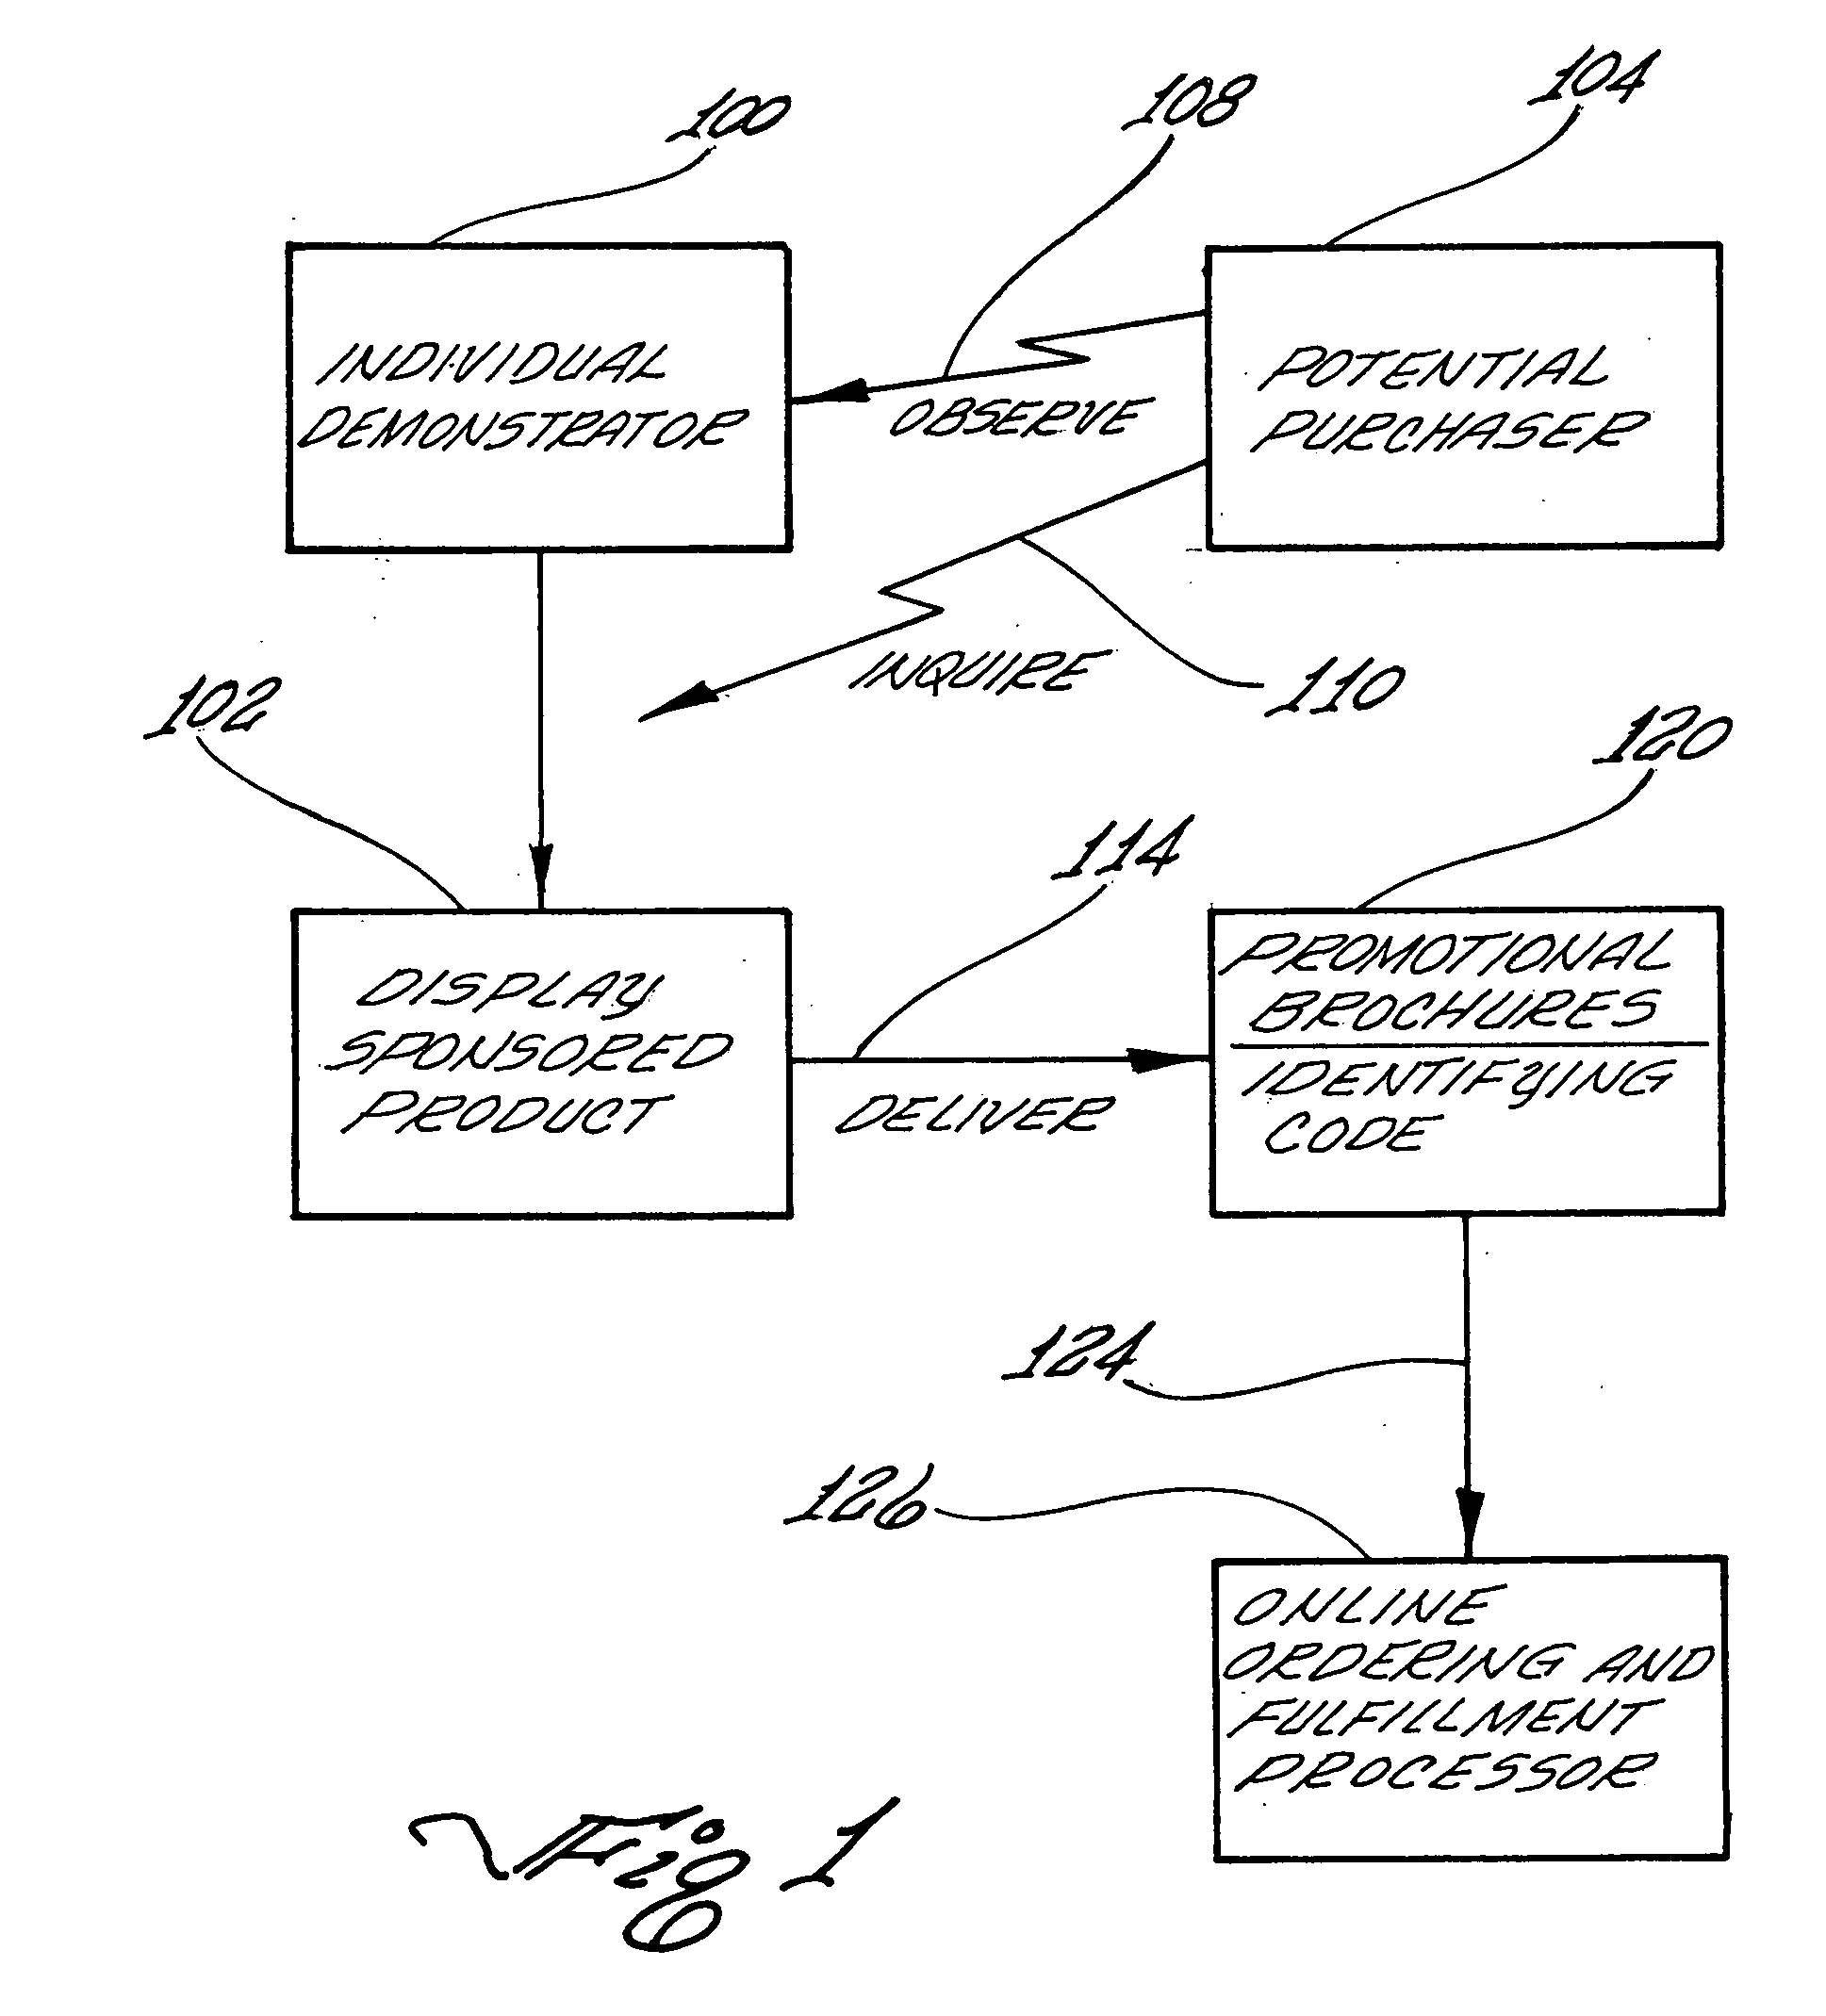 System for originating and consummating sales and method